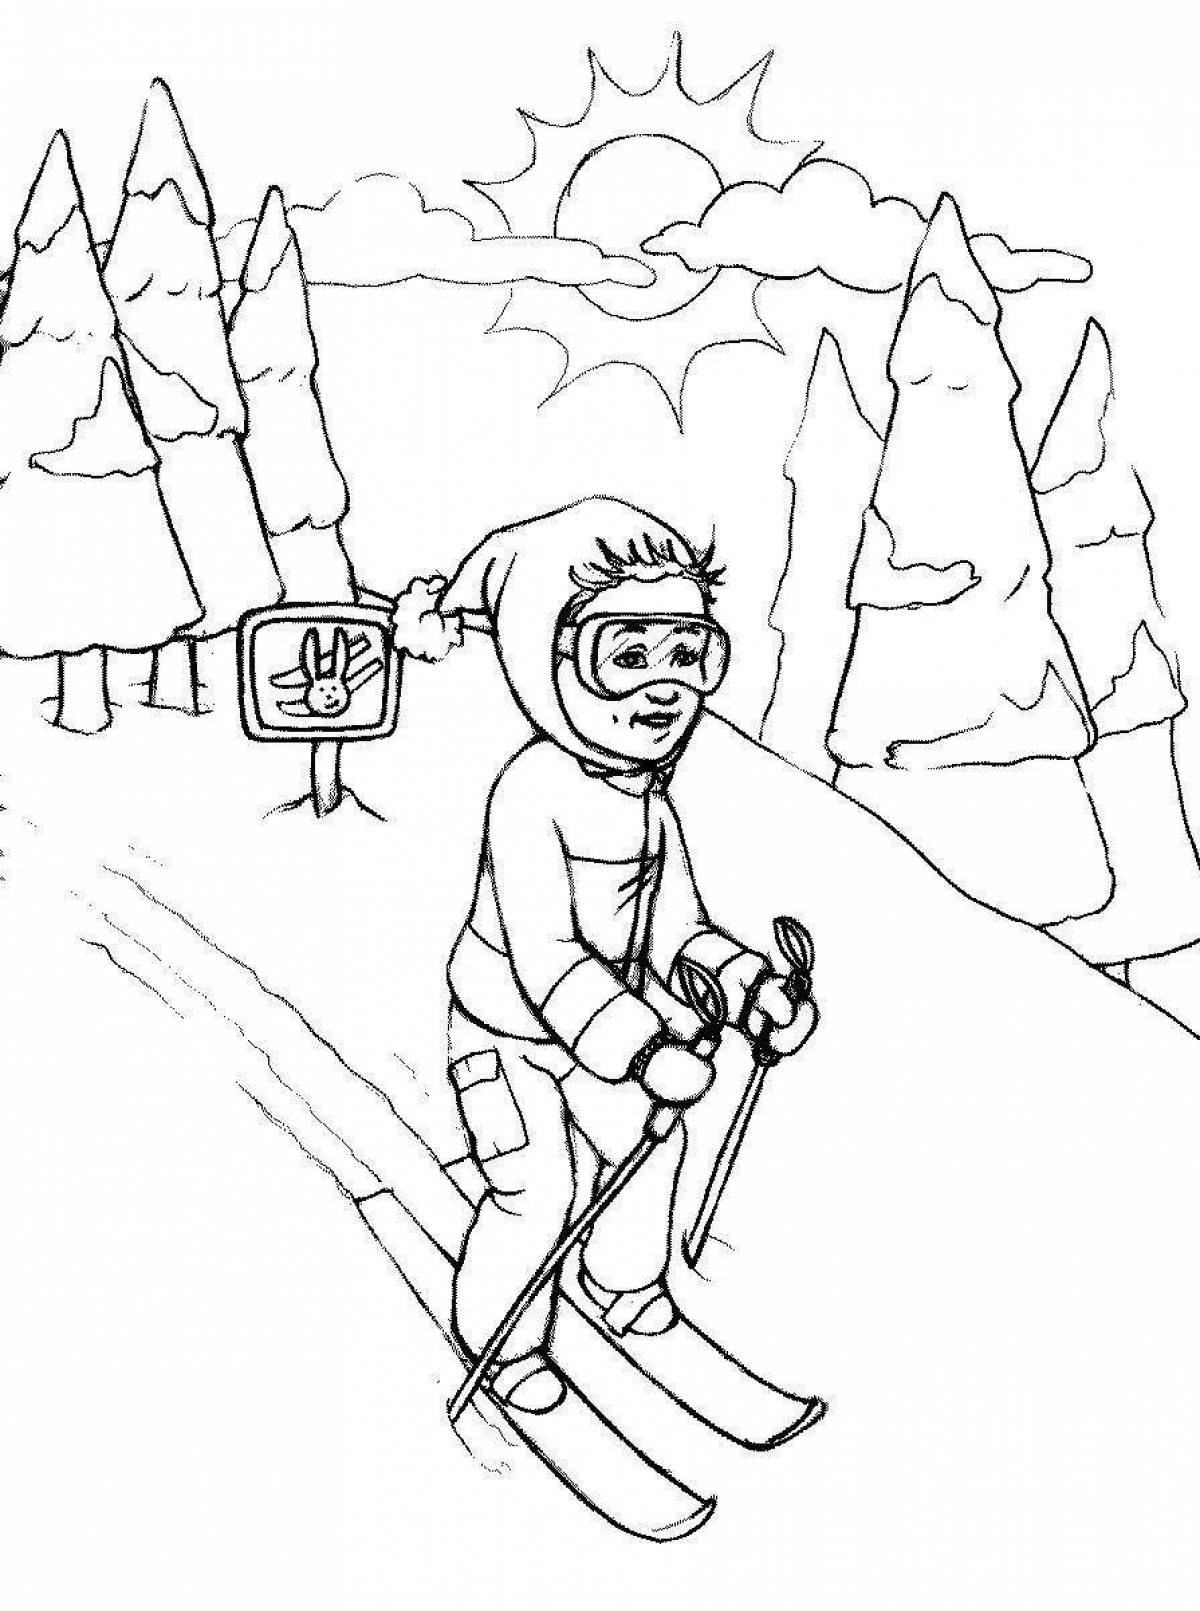 Adventure family skiing coloring book